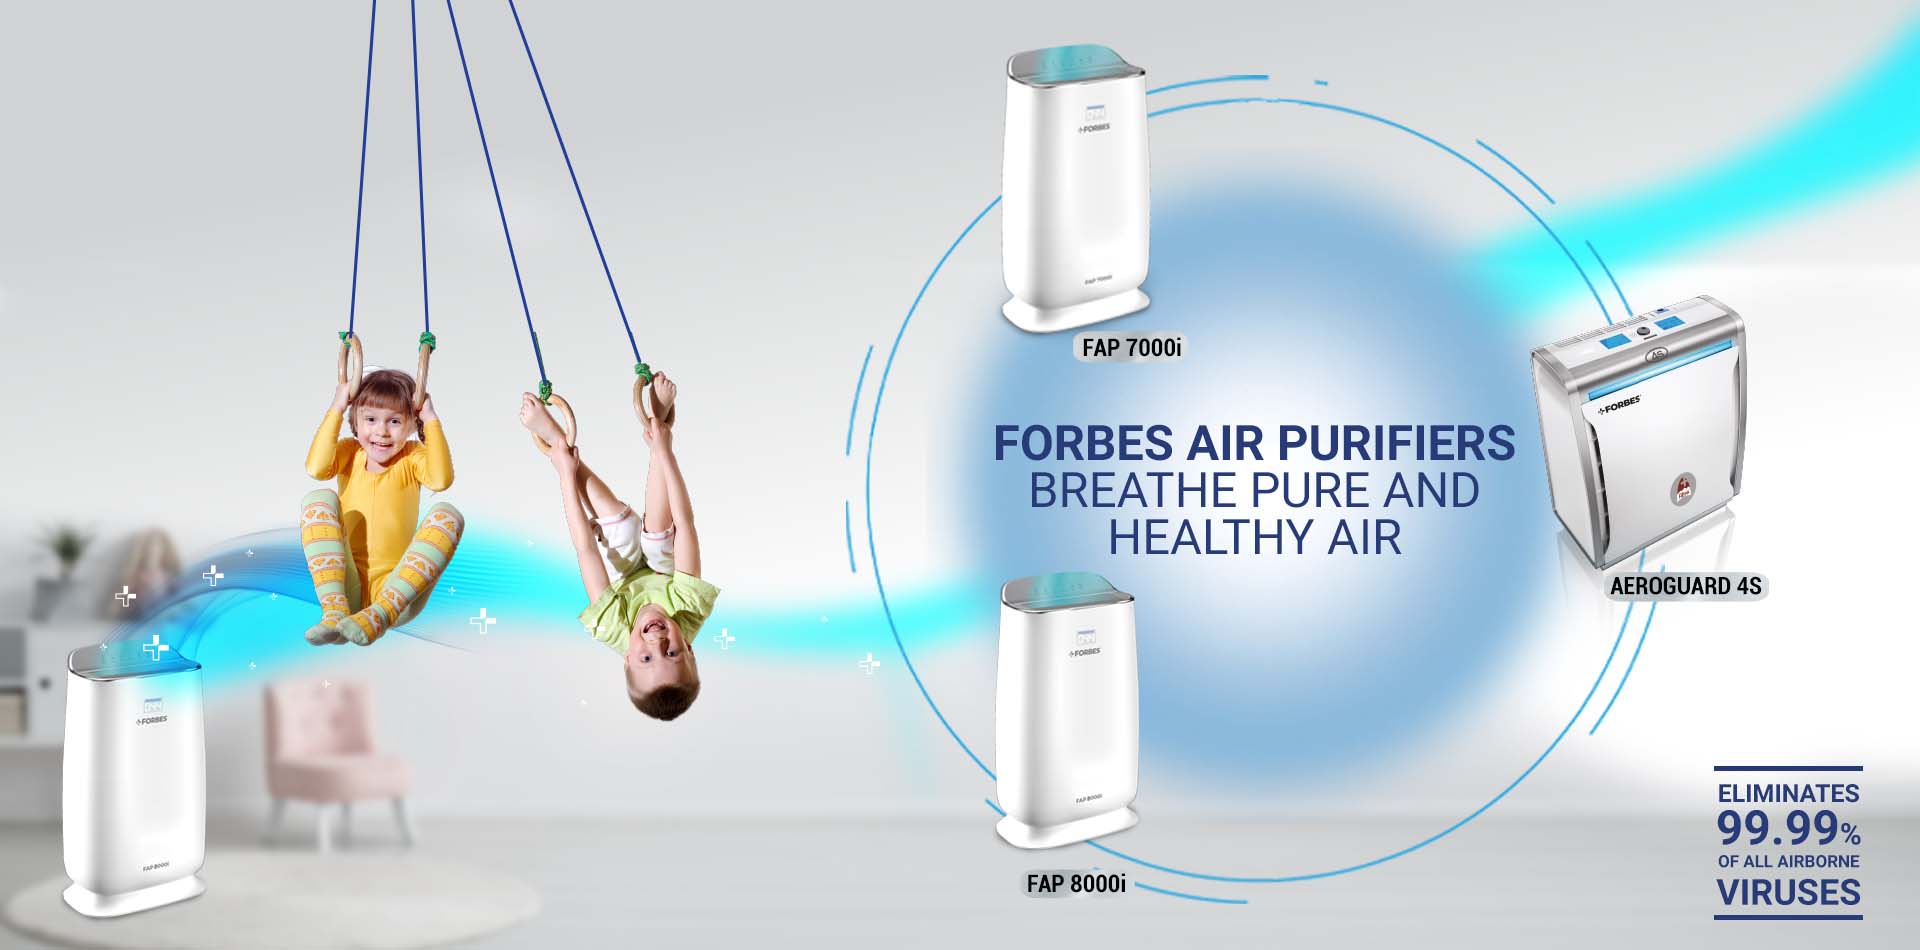 FORBES AIR PURIFIERS BREATHE PURE AND HEALTHY AIR